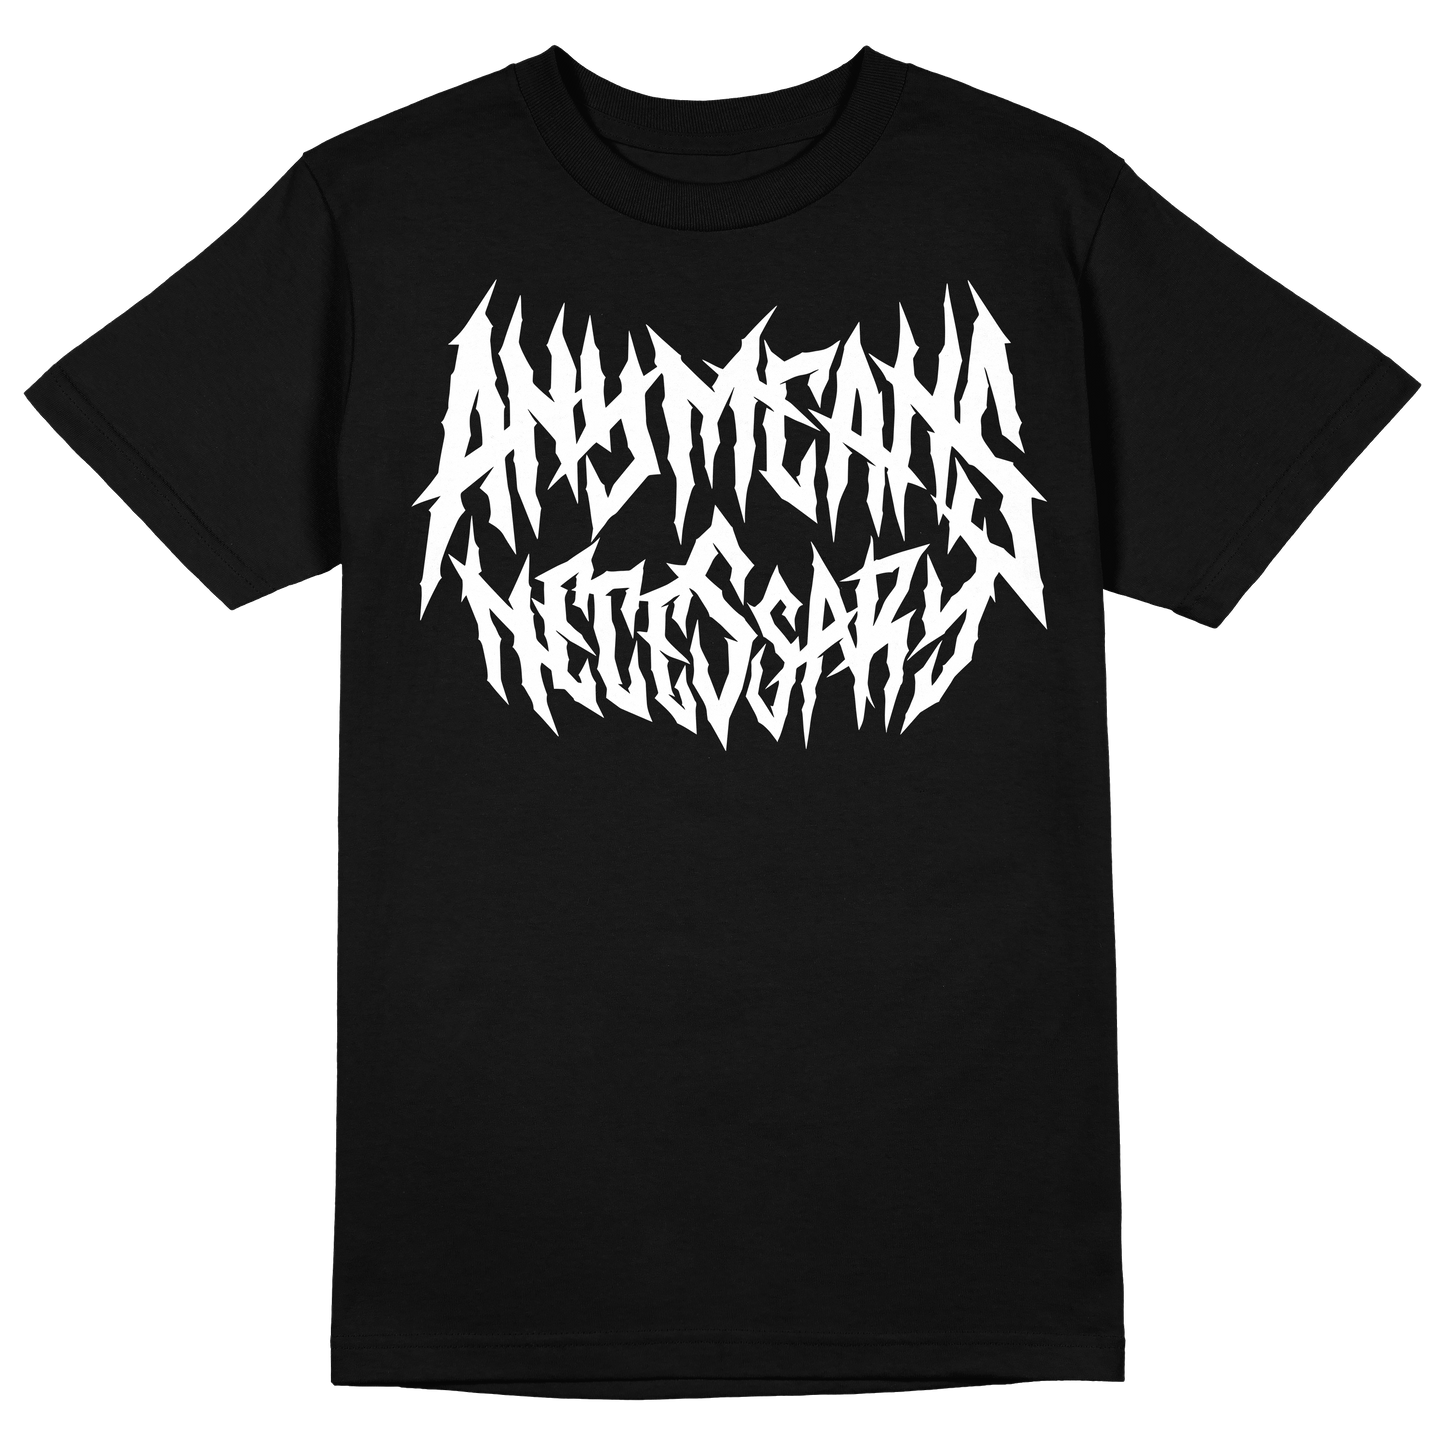 any means necessary shawn coss thrasher t shirt black